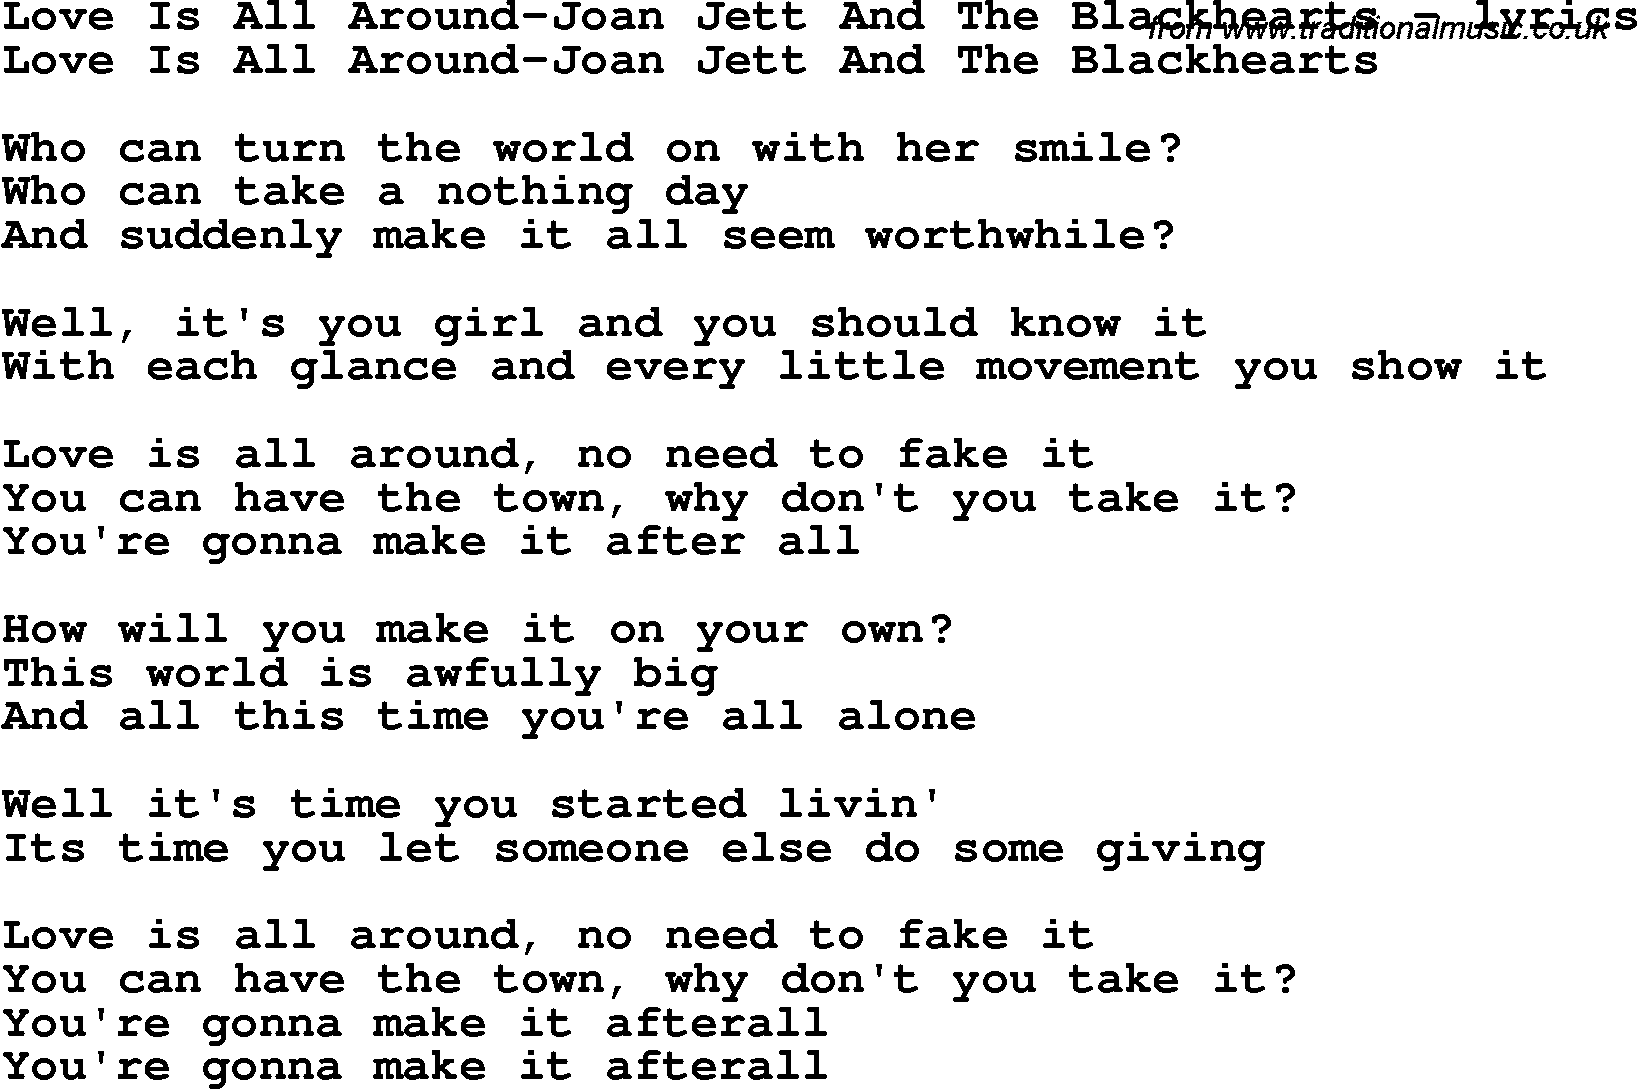 Love Song Lyrics for: Love Is All Around-Joan Jett And The Blackhearts